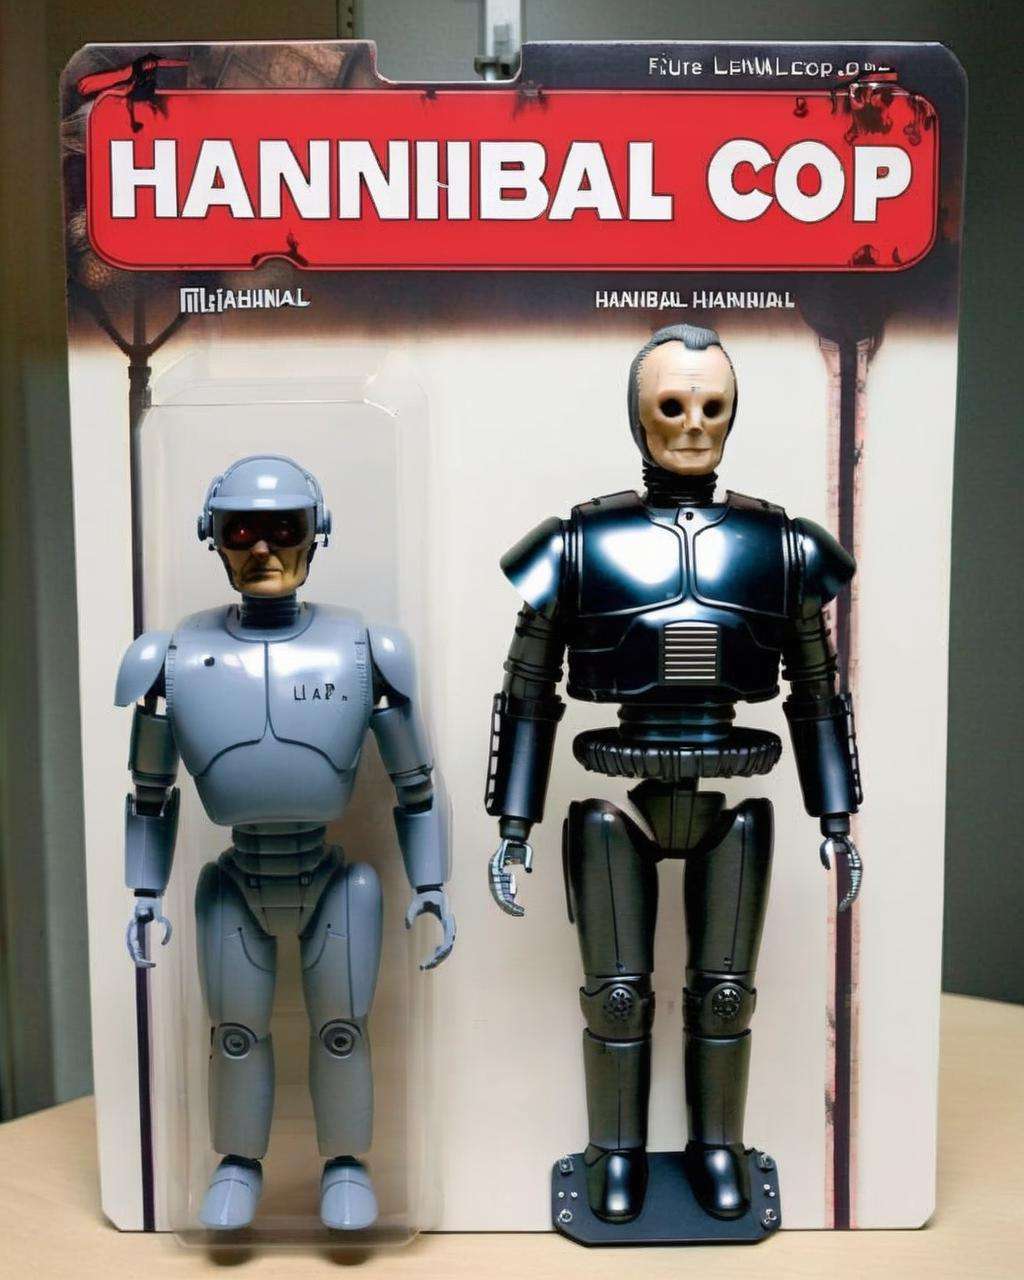 Robo-Hannibal: Merging RoboCop and Hannibal Lecter, this figure patrols the streets:0.6 while harboring a taste for the macabre:0.4. <lora:Awe_Toys:1.0>